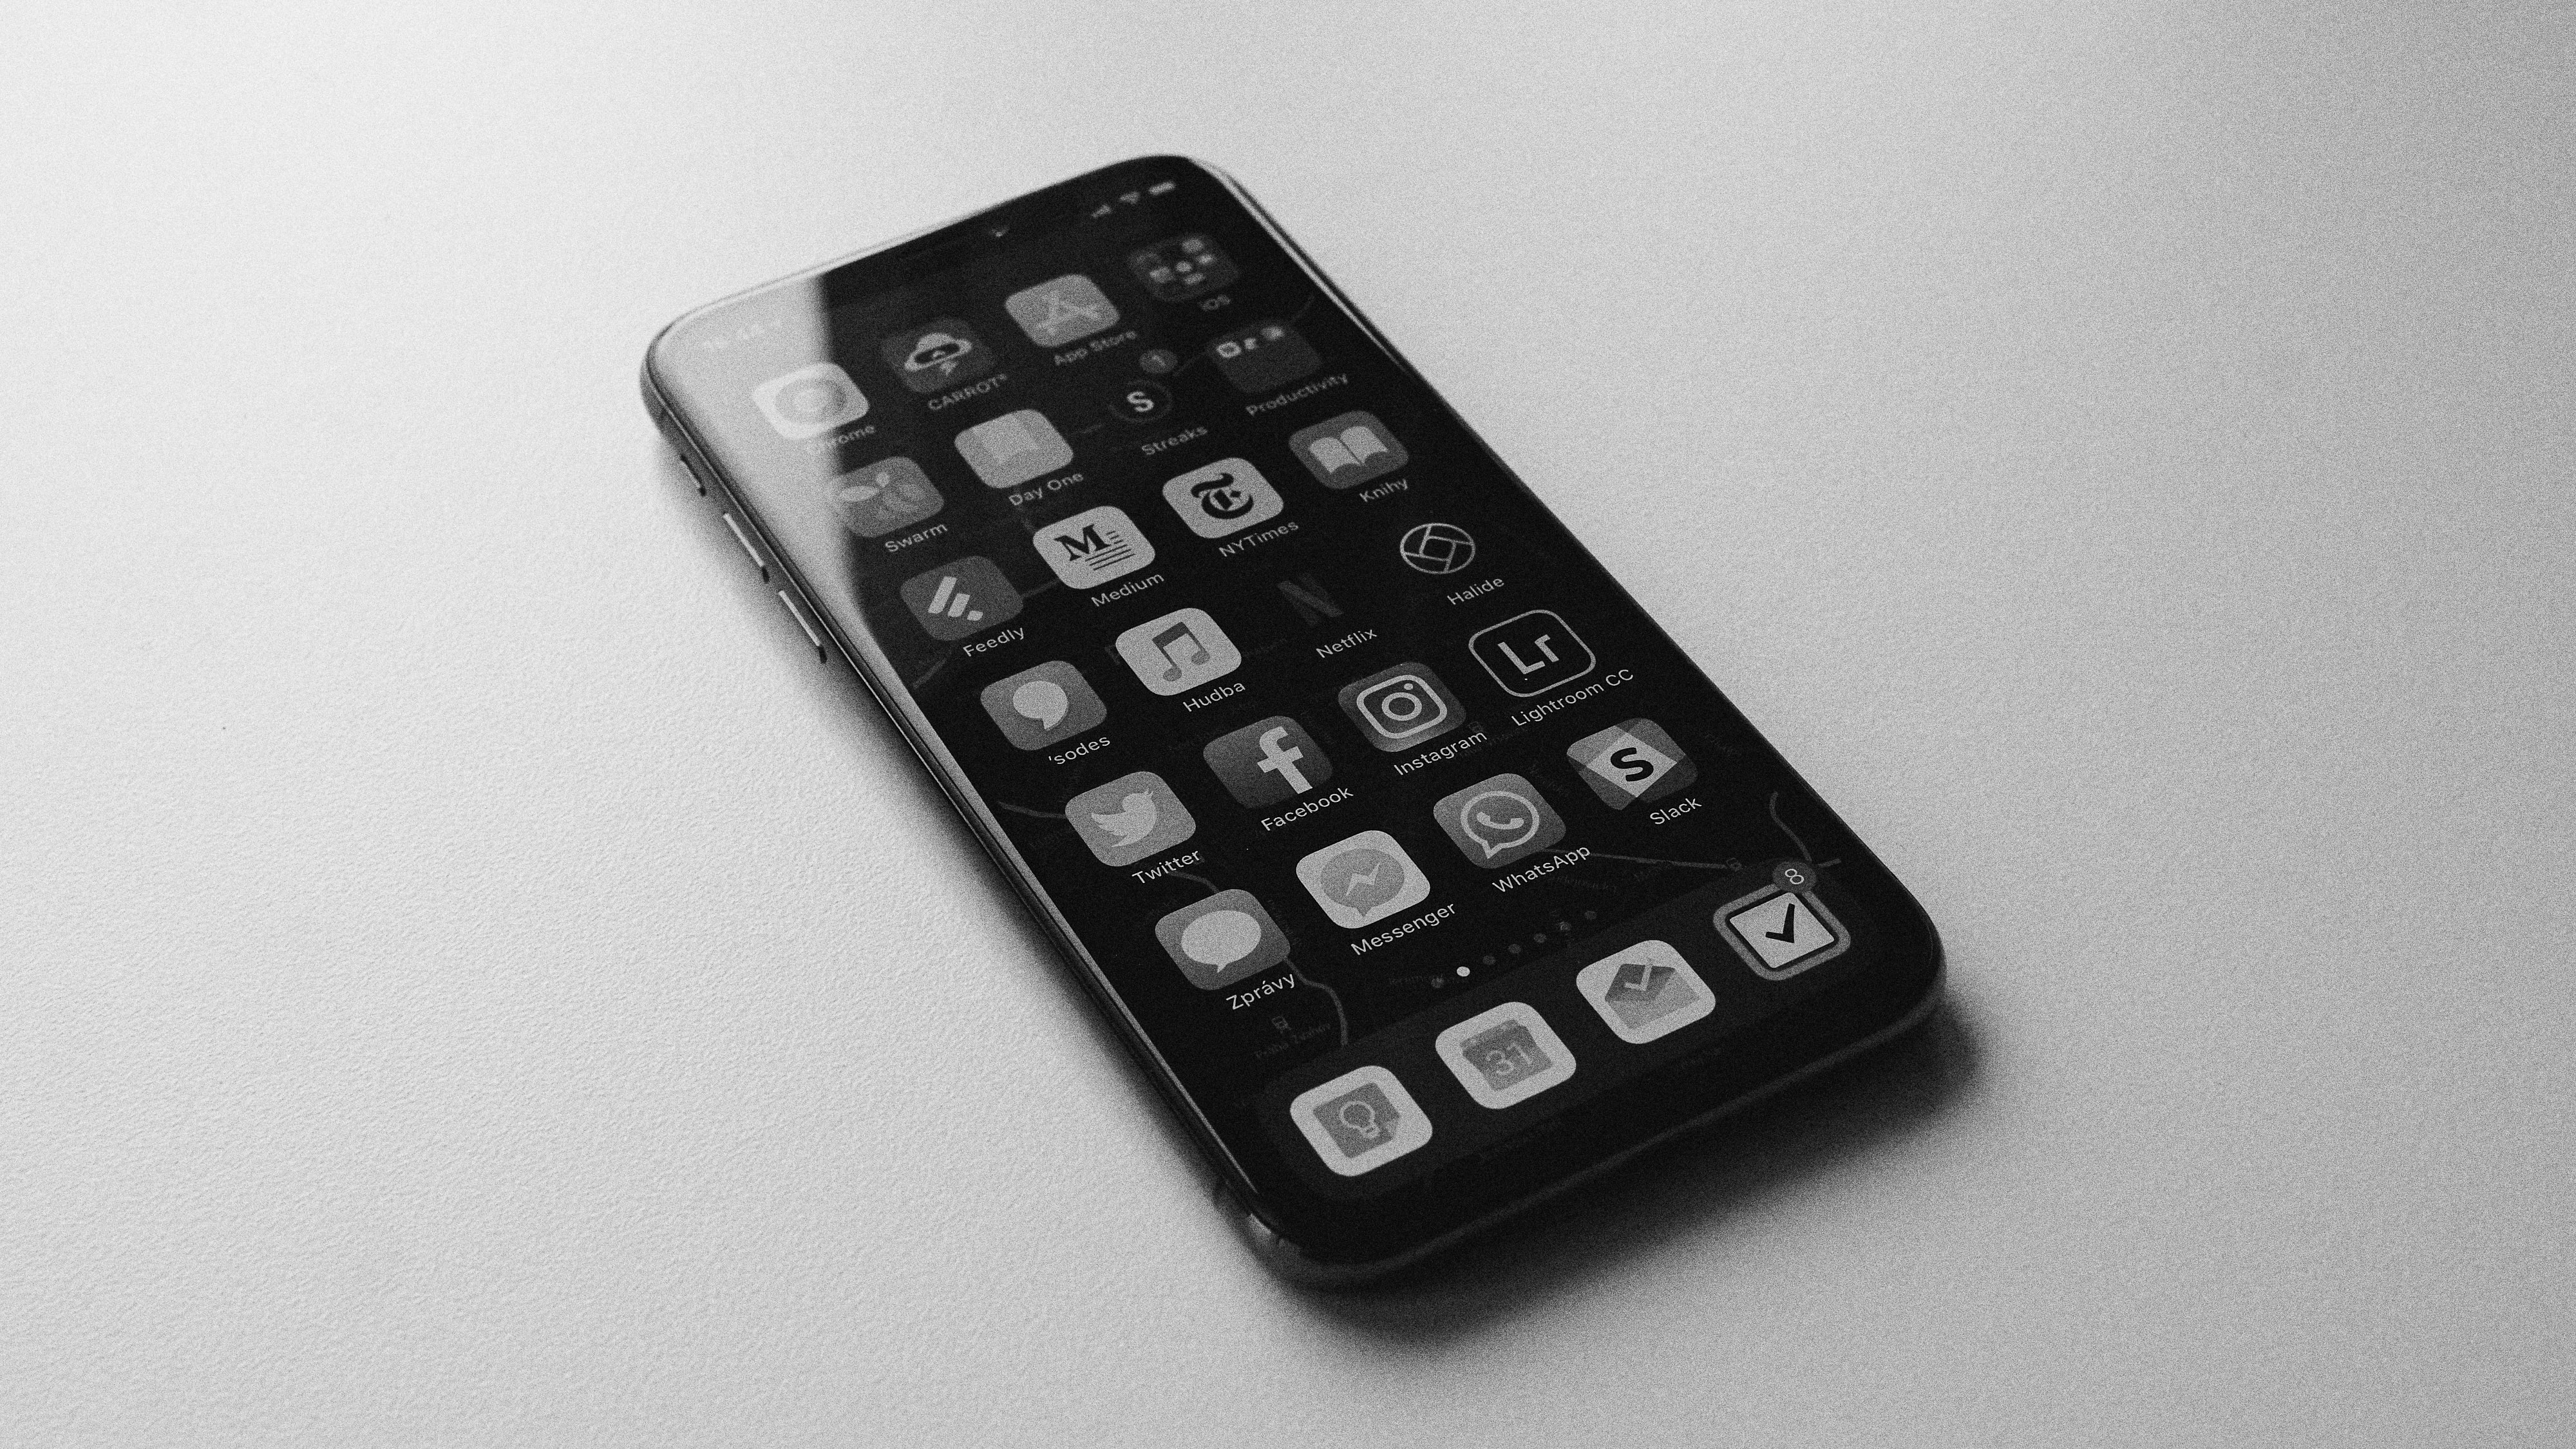 A black and white image of a smartphone with app icons on screen